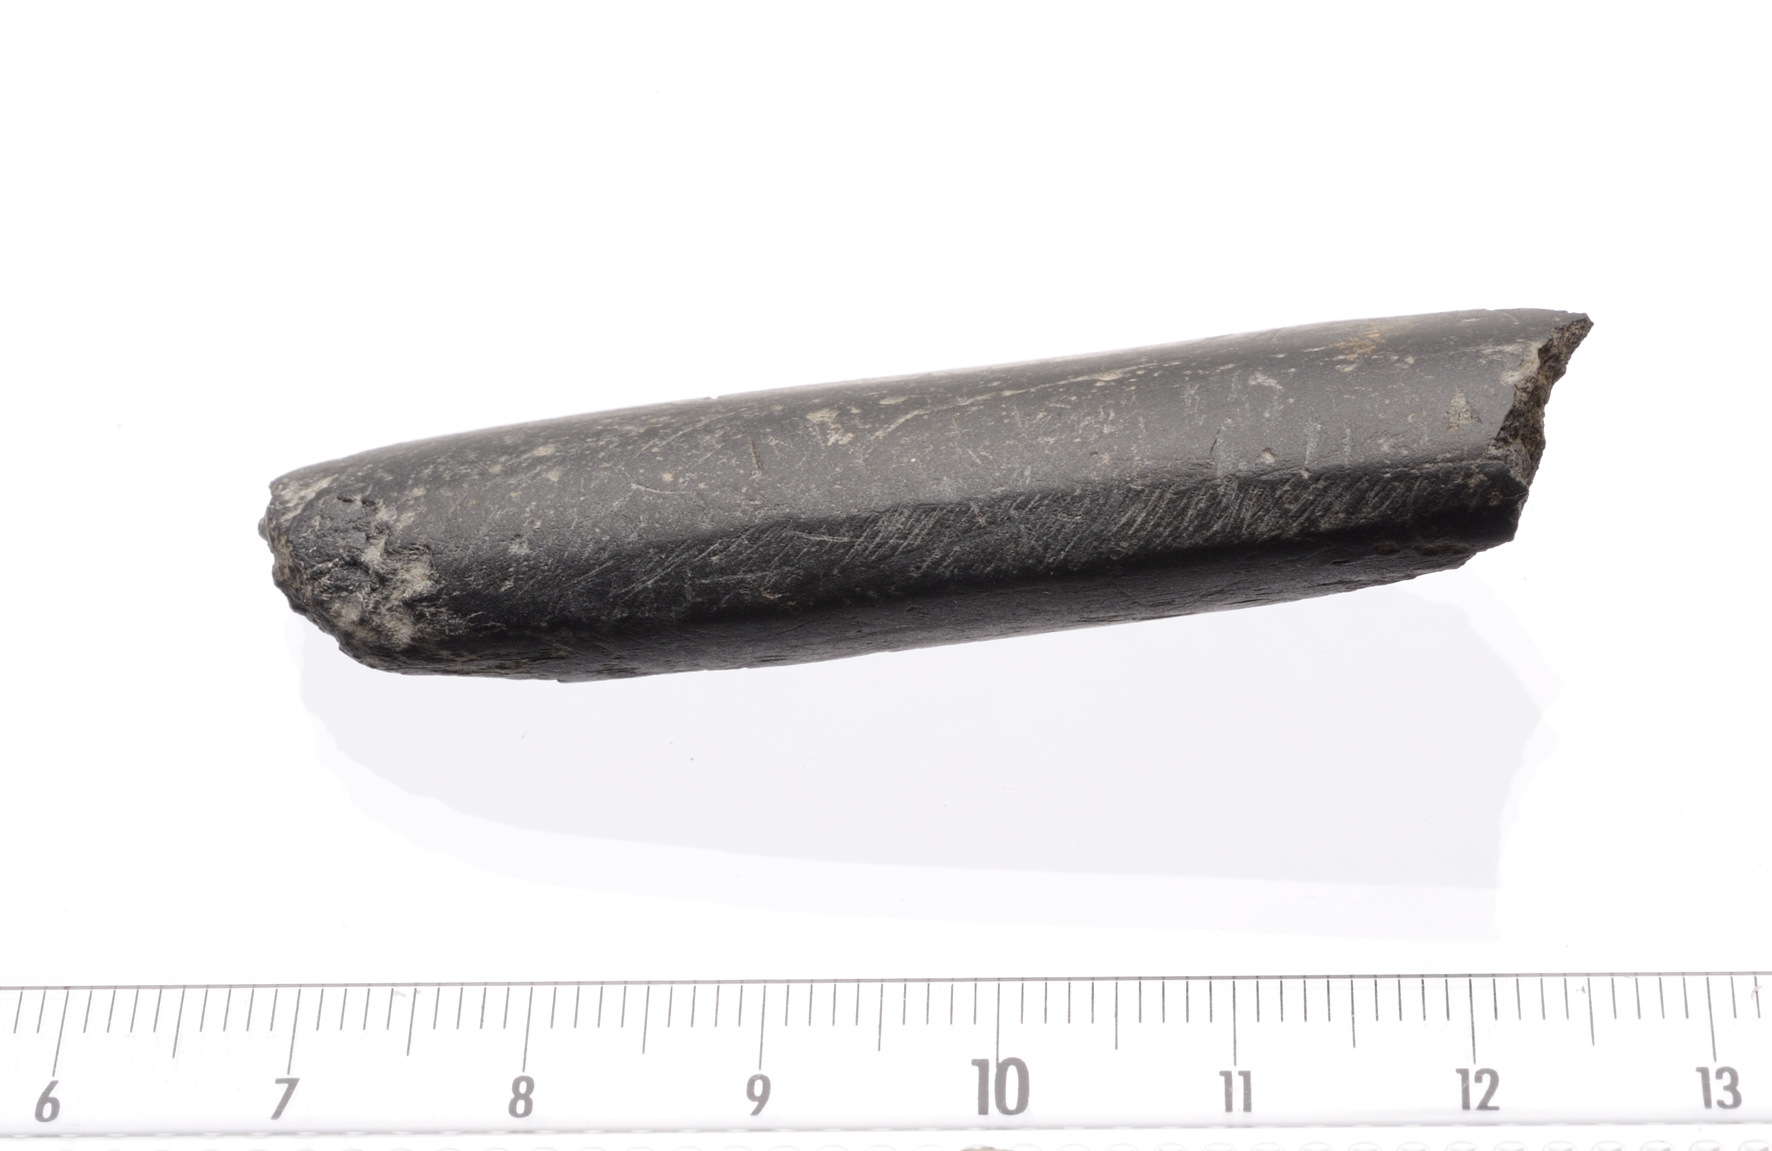 Image: Neolithic polished stone axe found close to the Faravel rock shelter (Photo: Guillaume Contini)